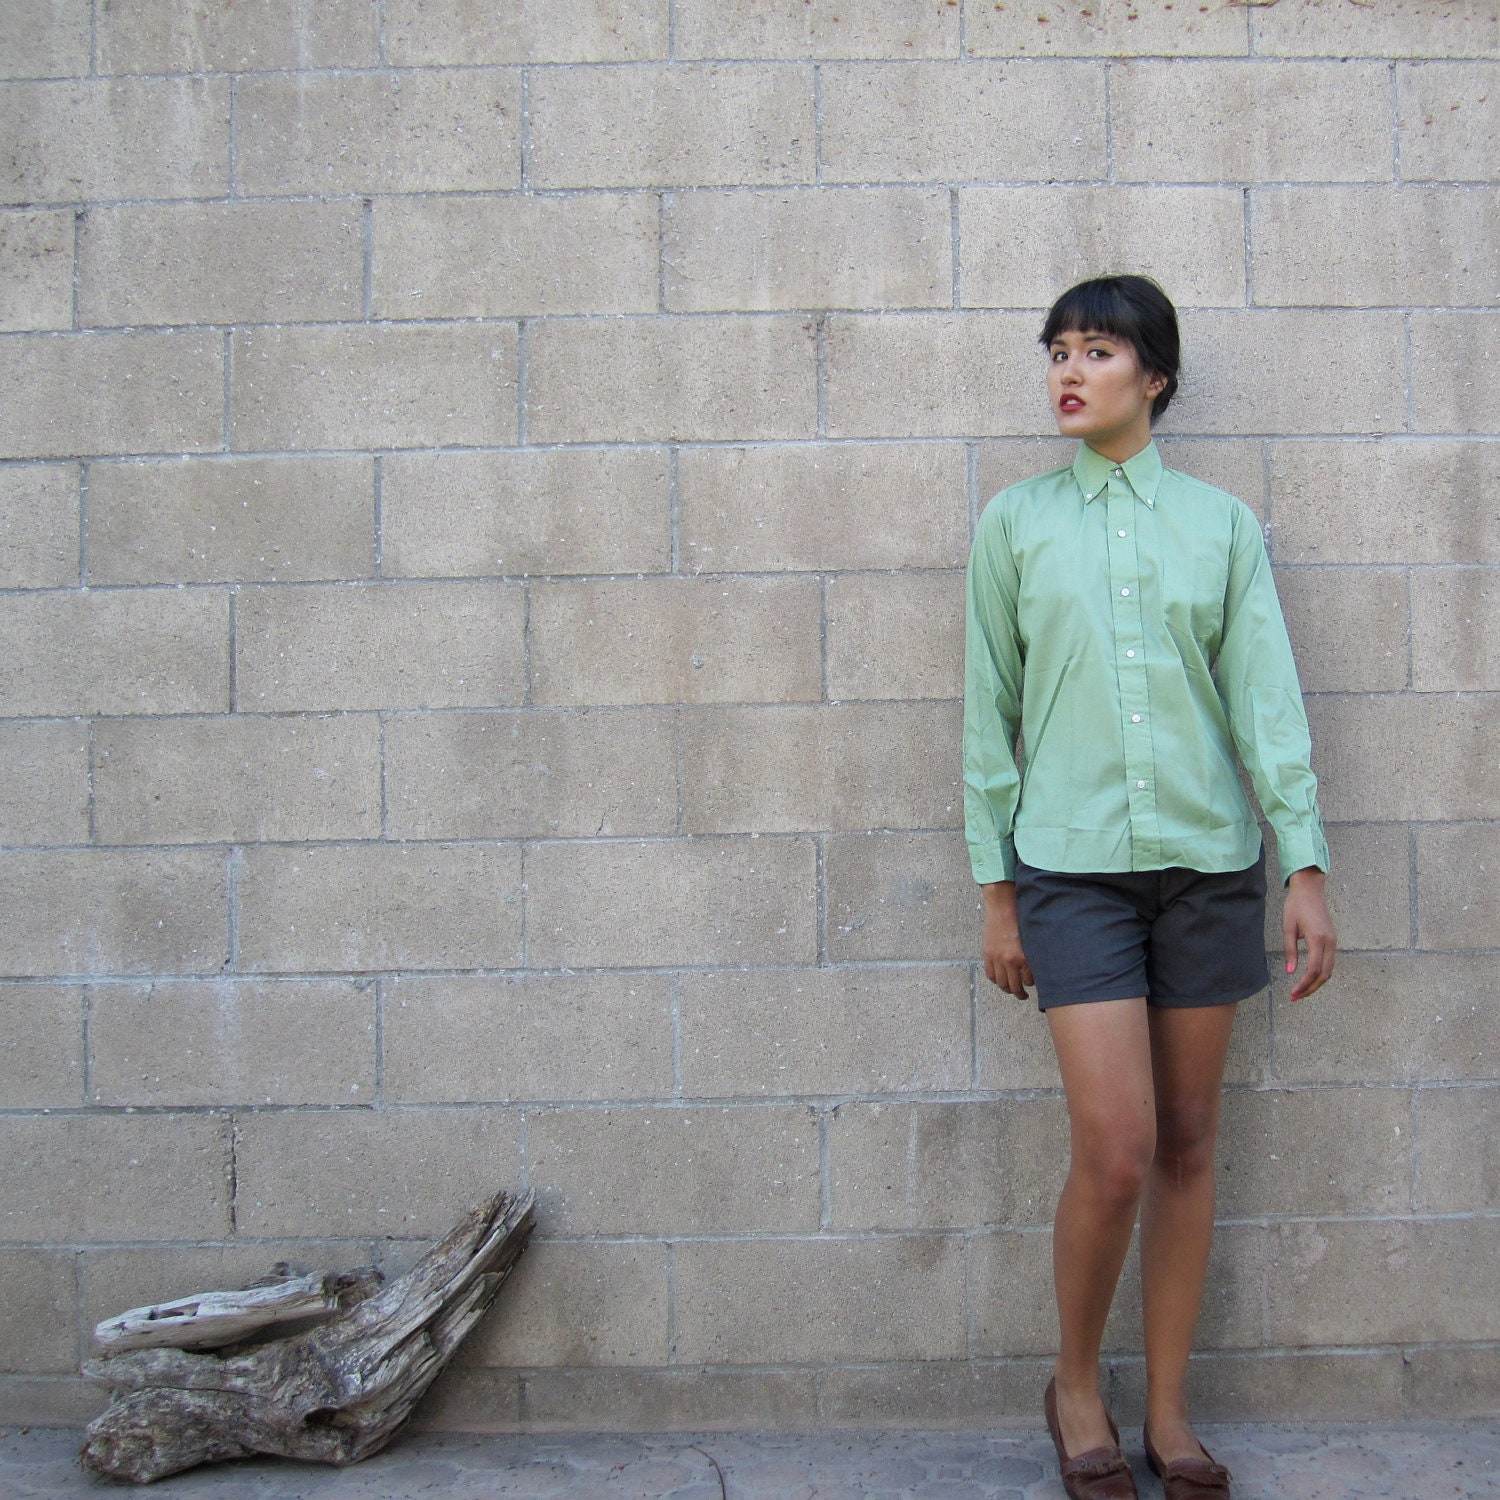 1960s blouse/ The Villager deadstock nos oxford button up/ sage green blouse S - MILKTEETHS